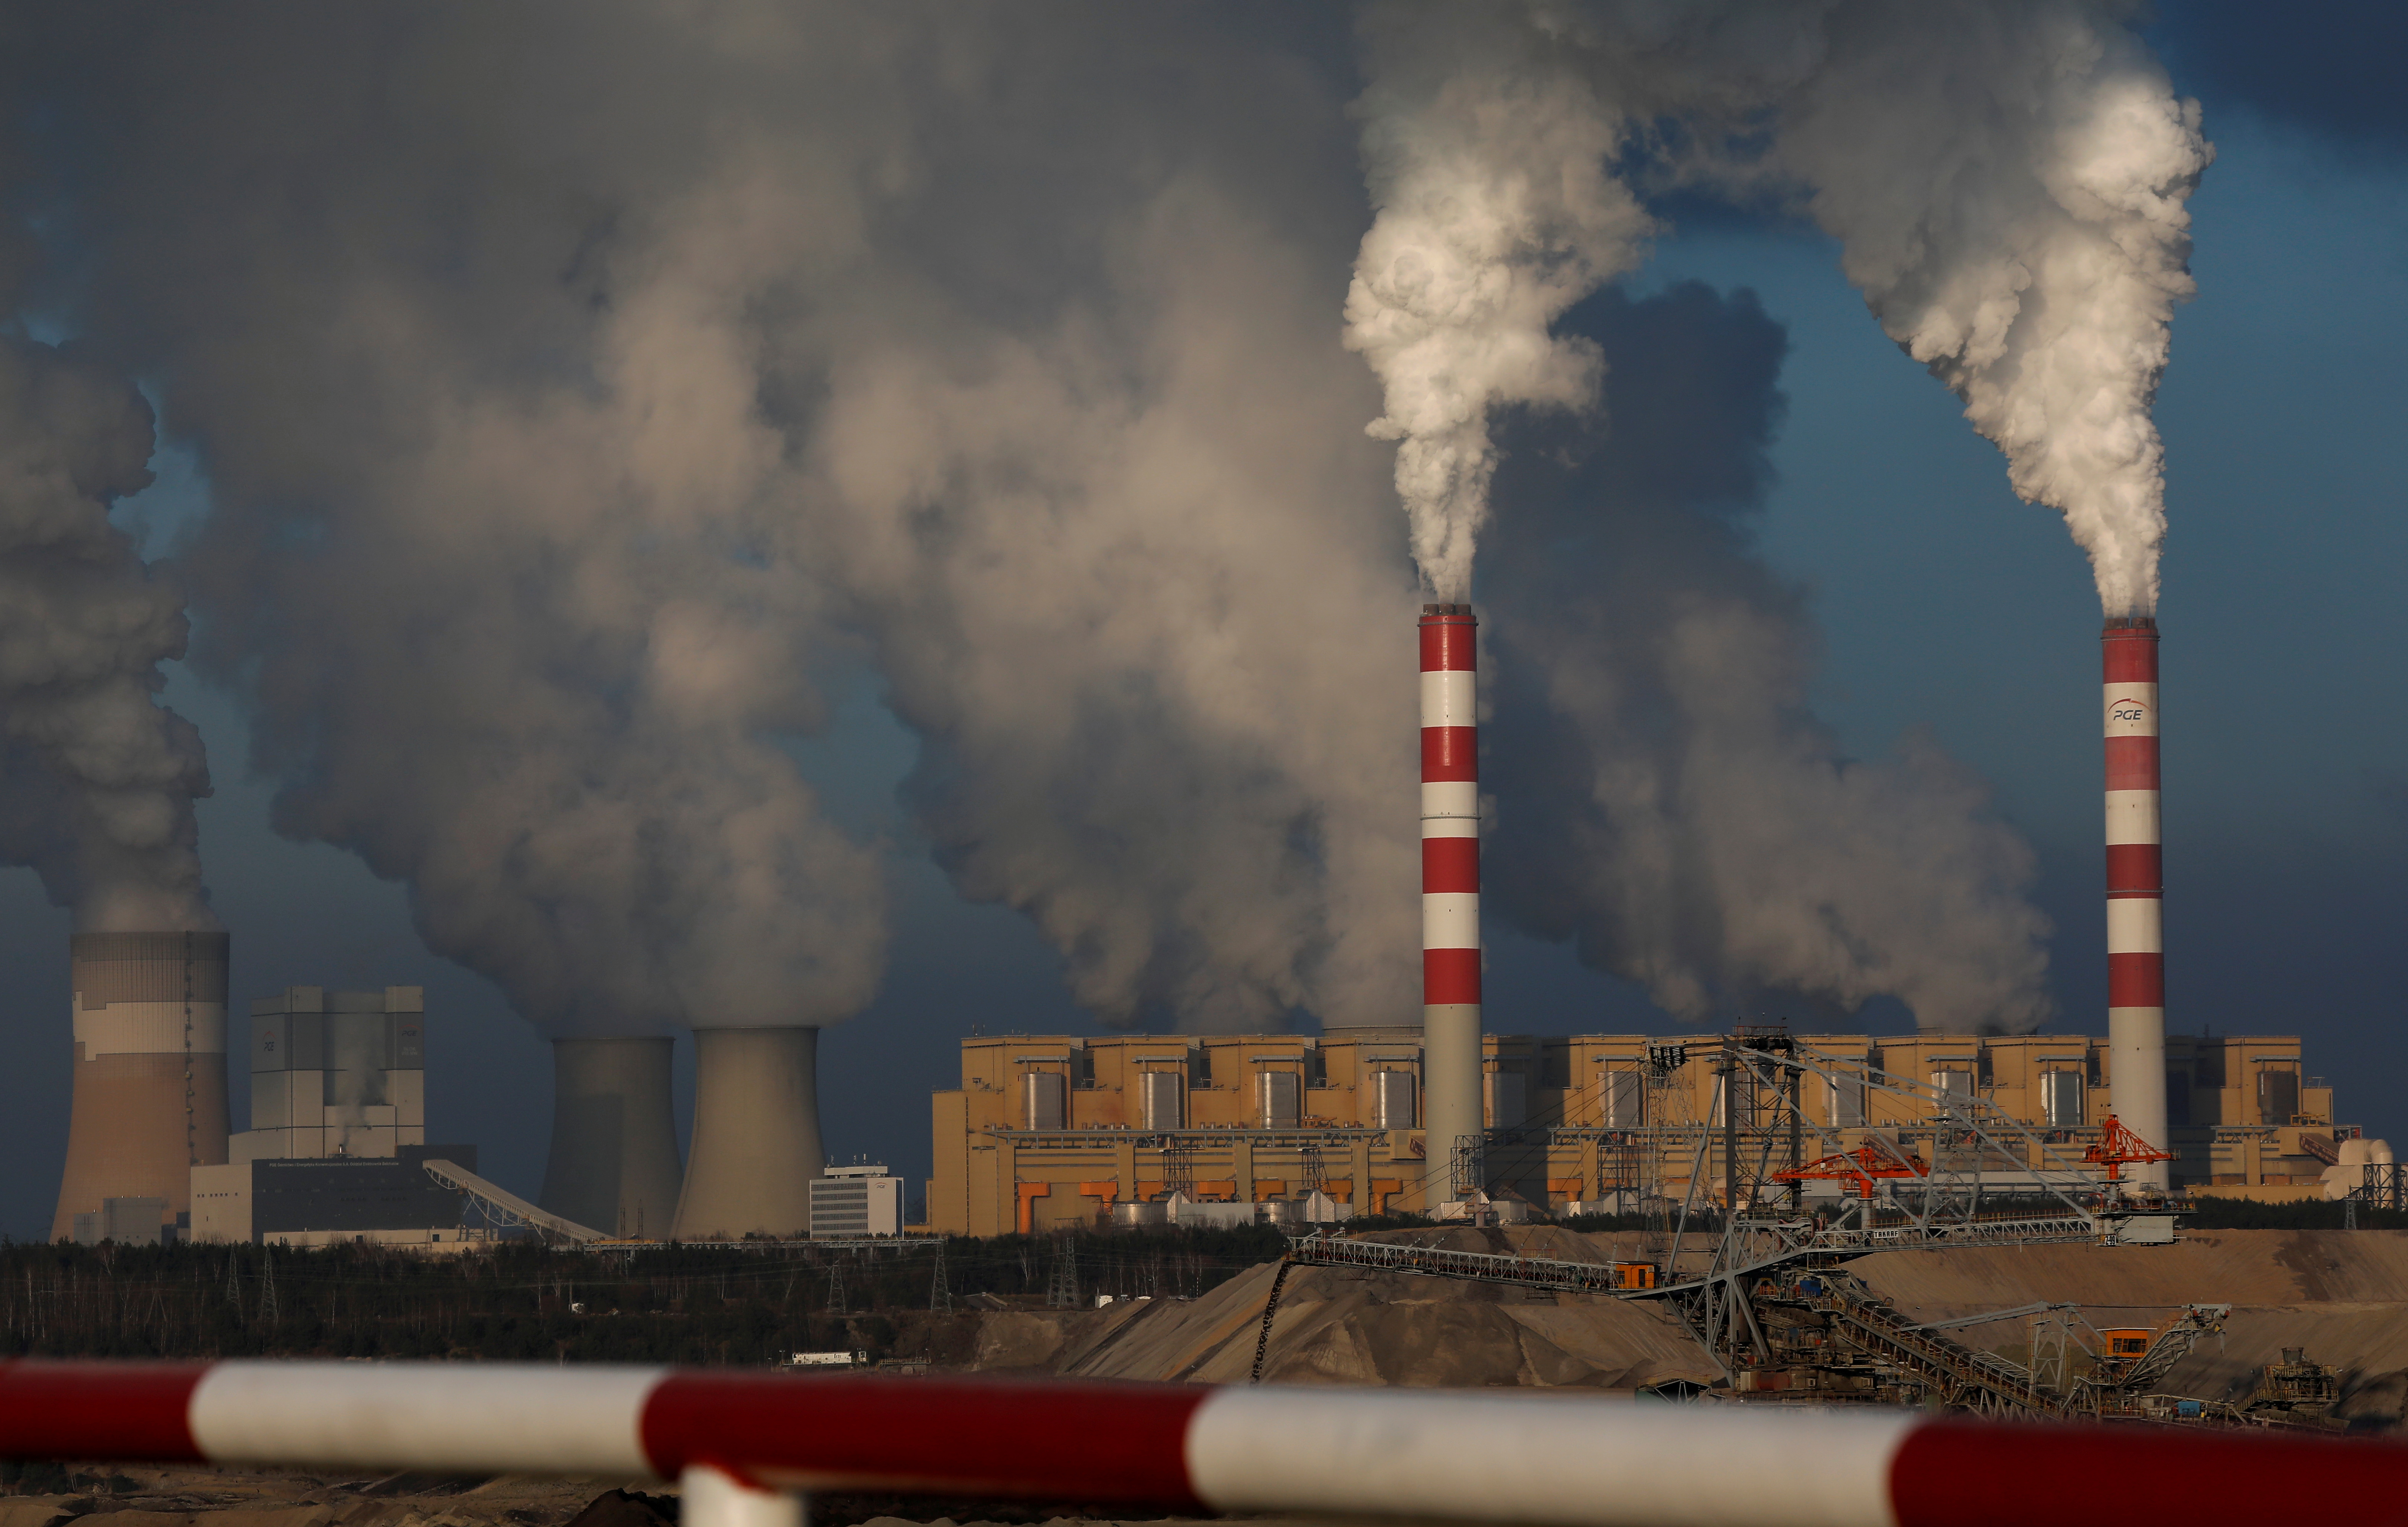 Smoke and steam billows from Belchatow Power Station, Europe's largest coal-fired power plant operated by PGE Group, near Belchatow